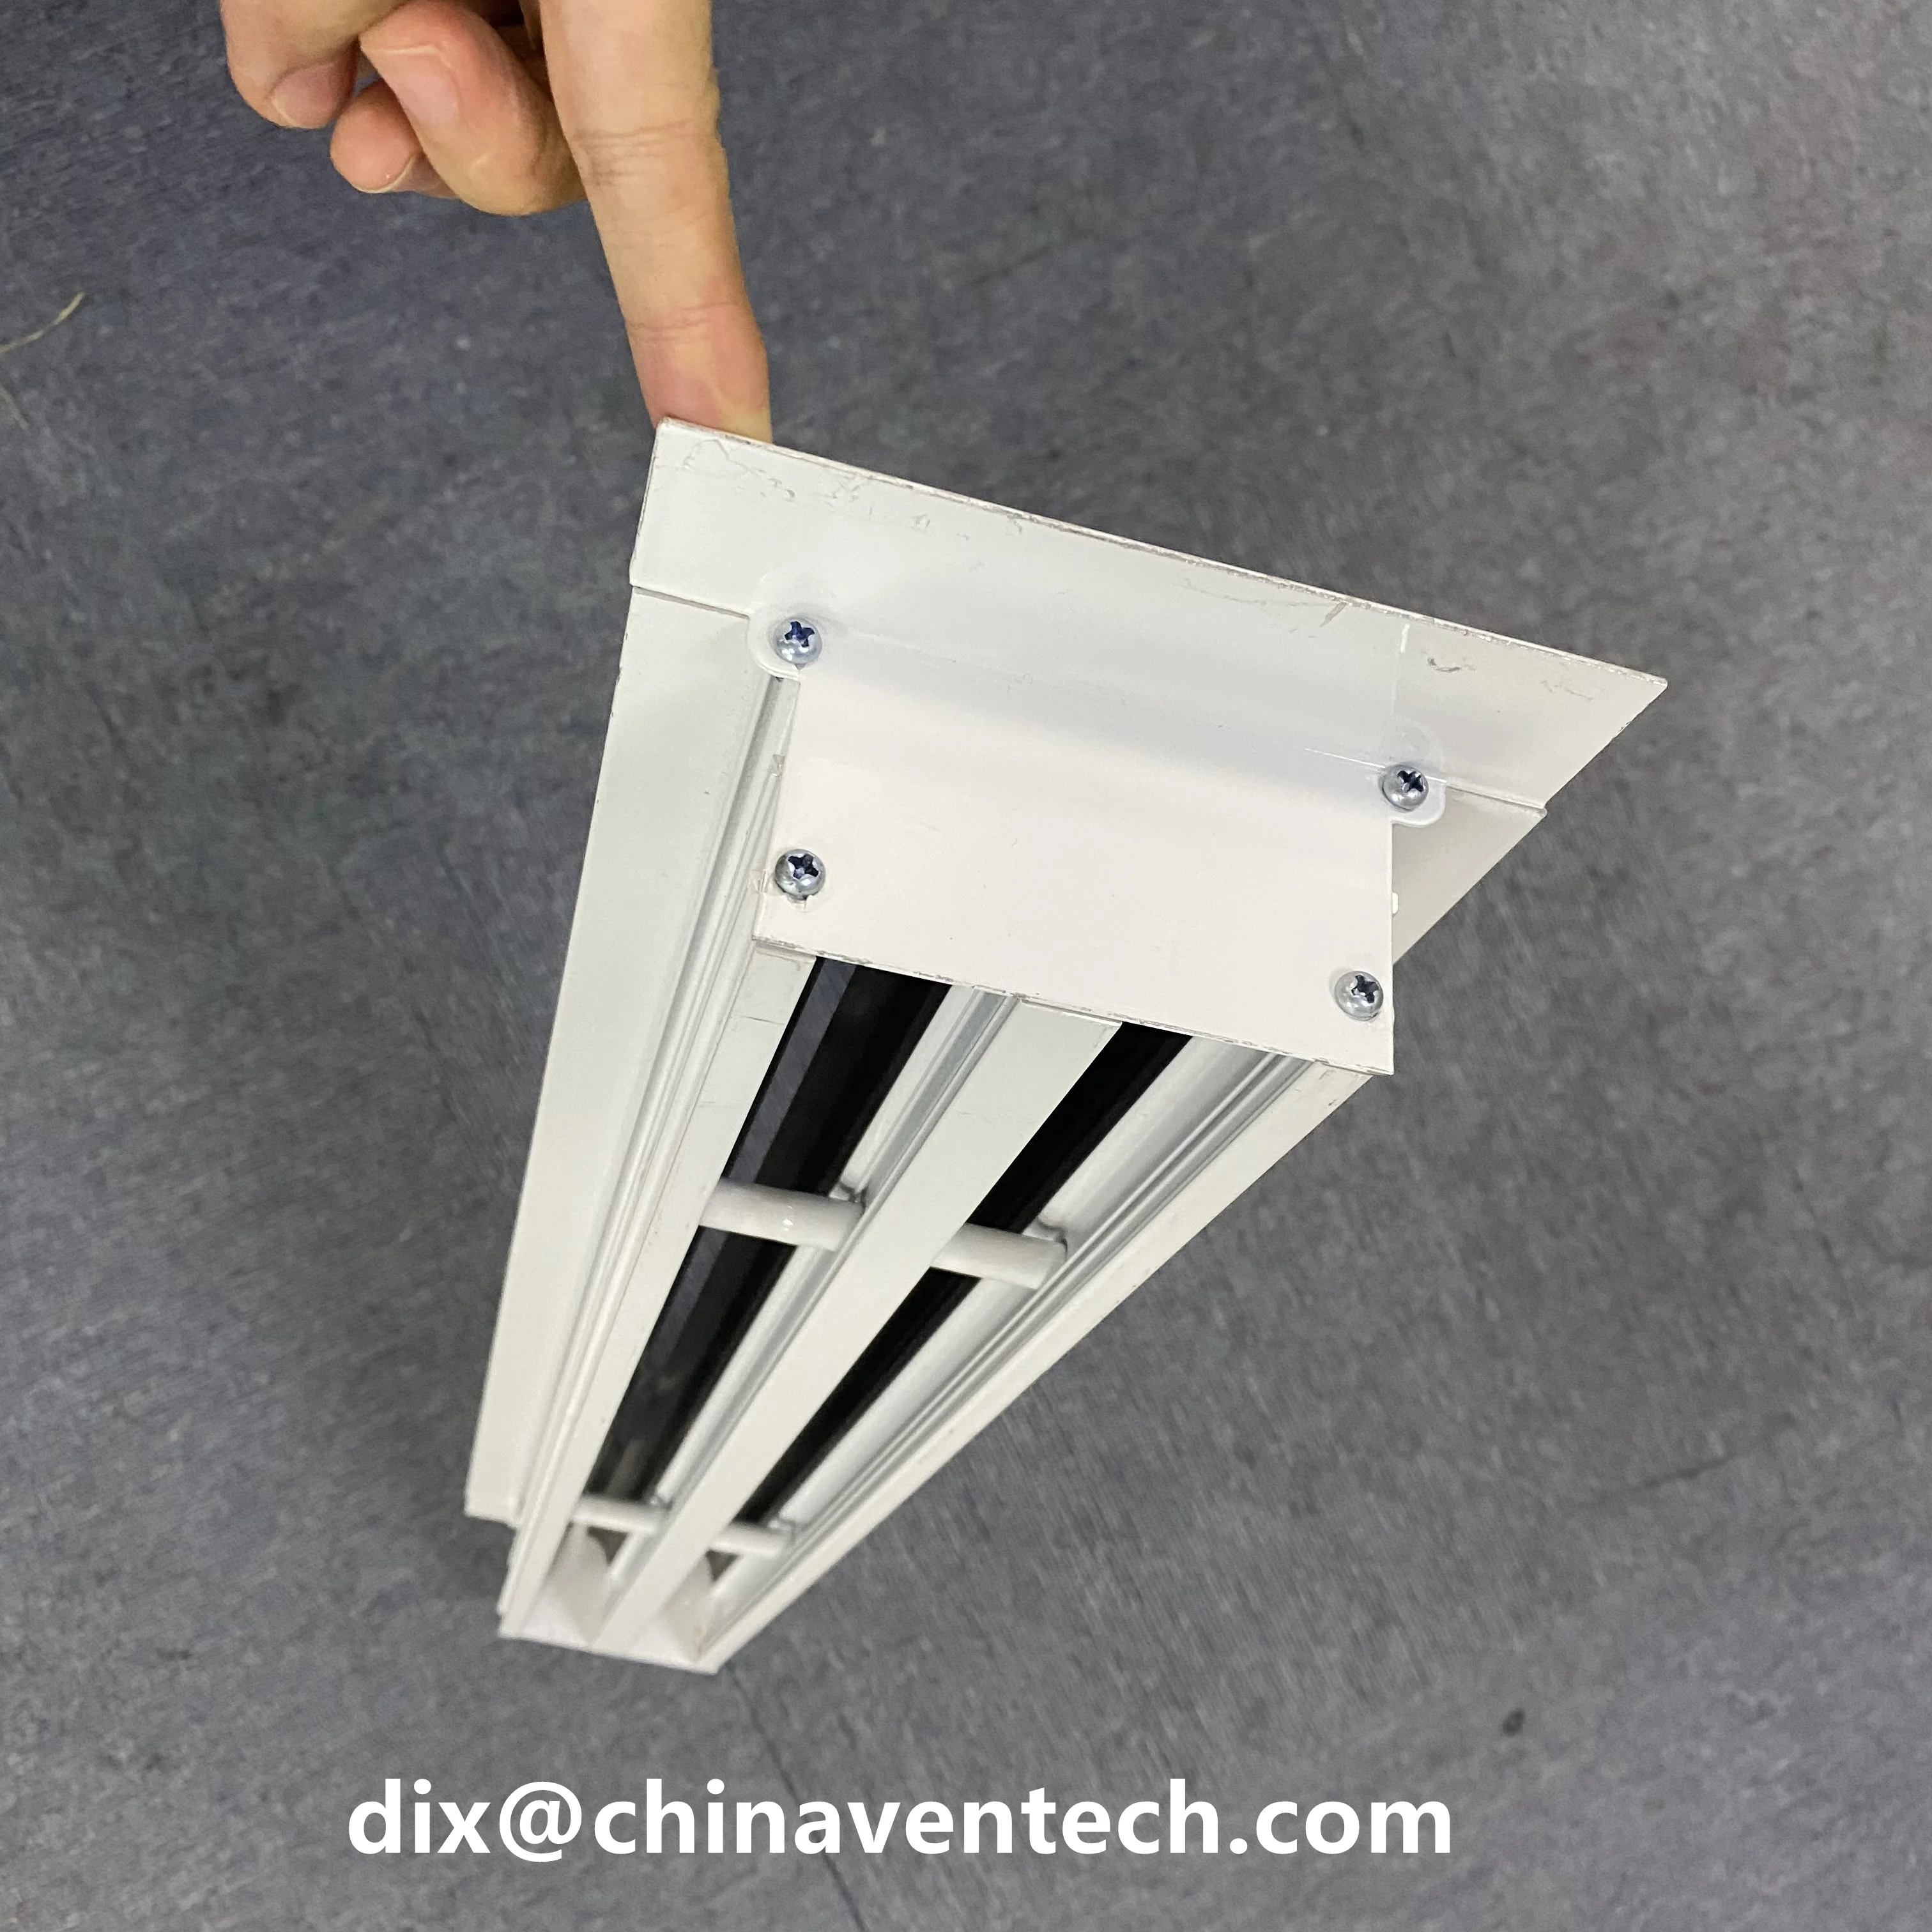 Ventech Hvac air conditioning aluminum supply air linear slot diffuser for residential project used